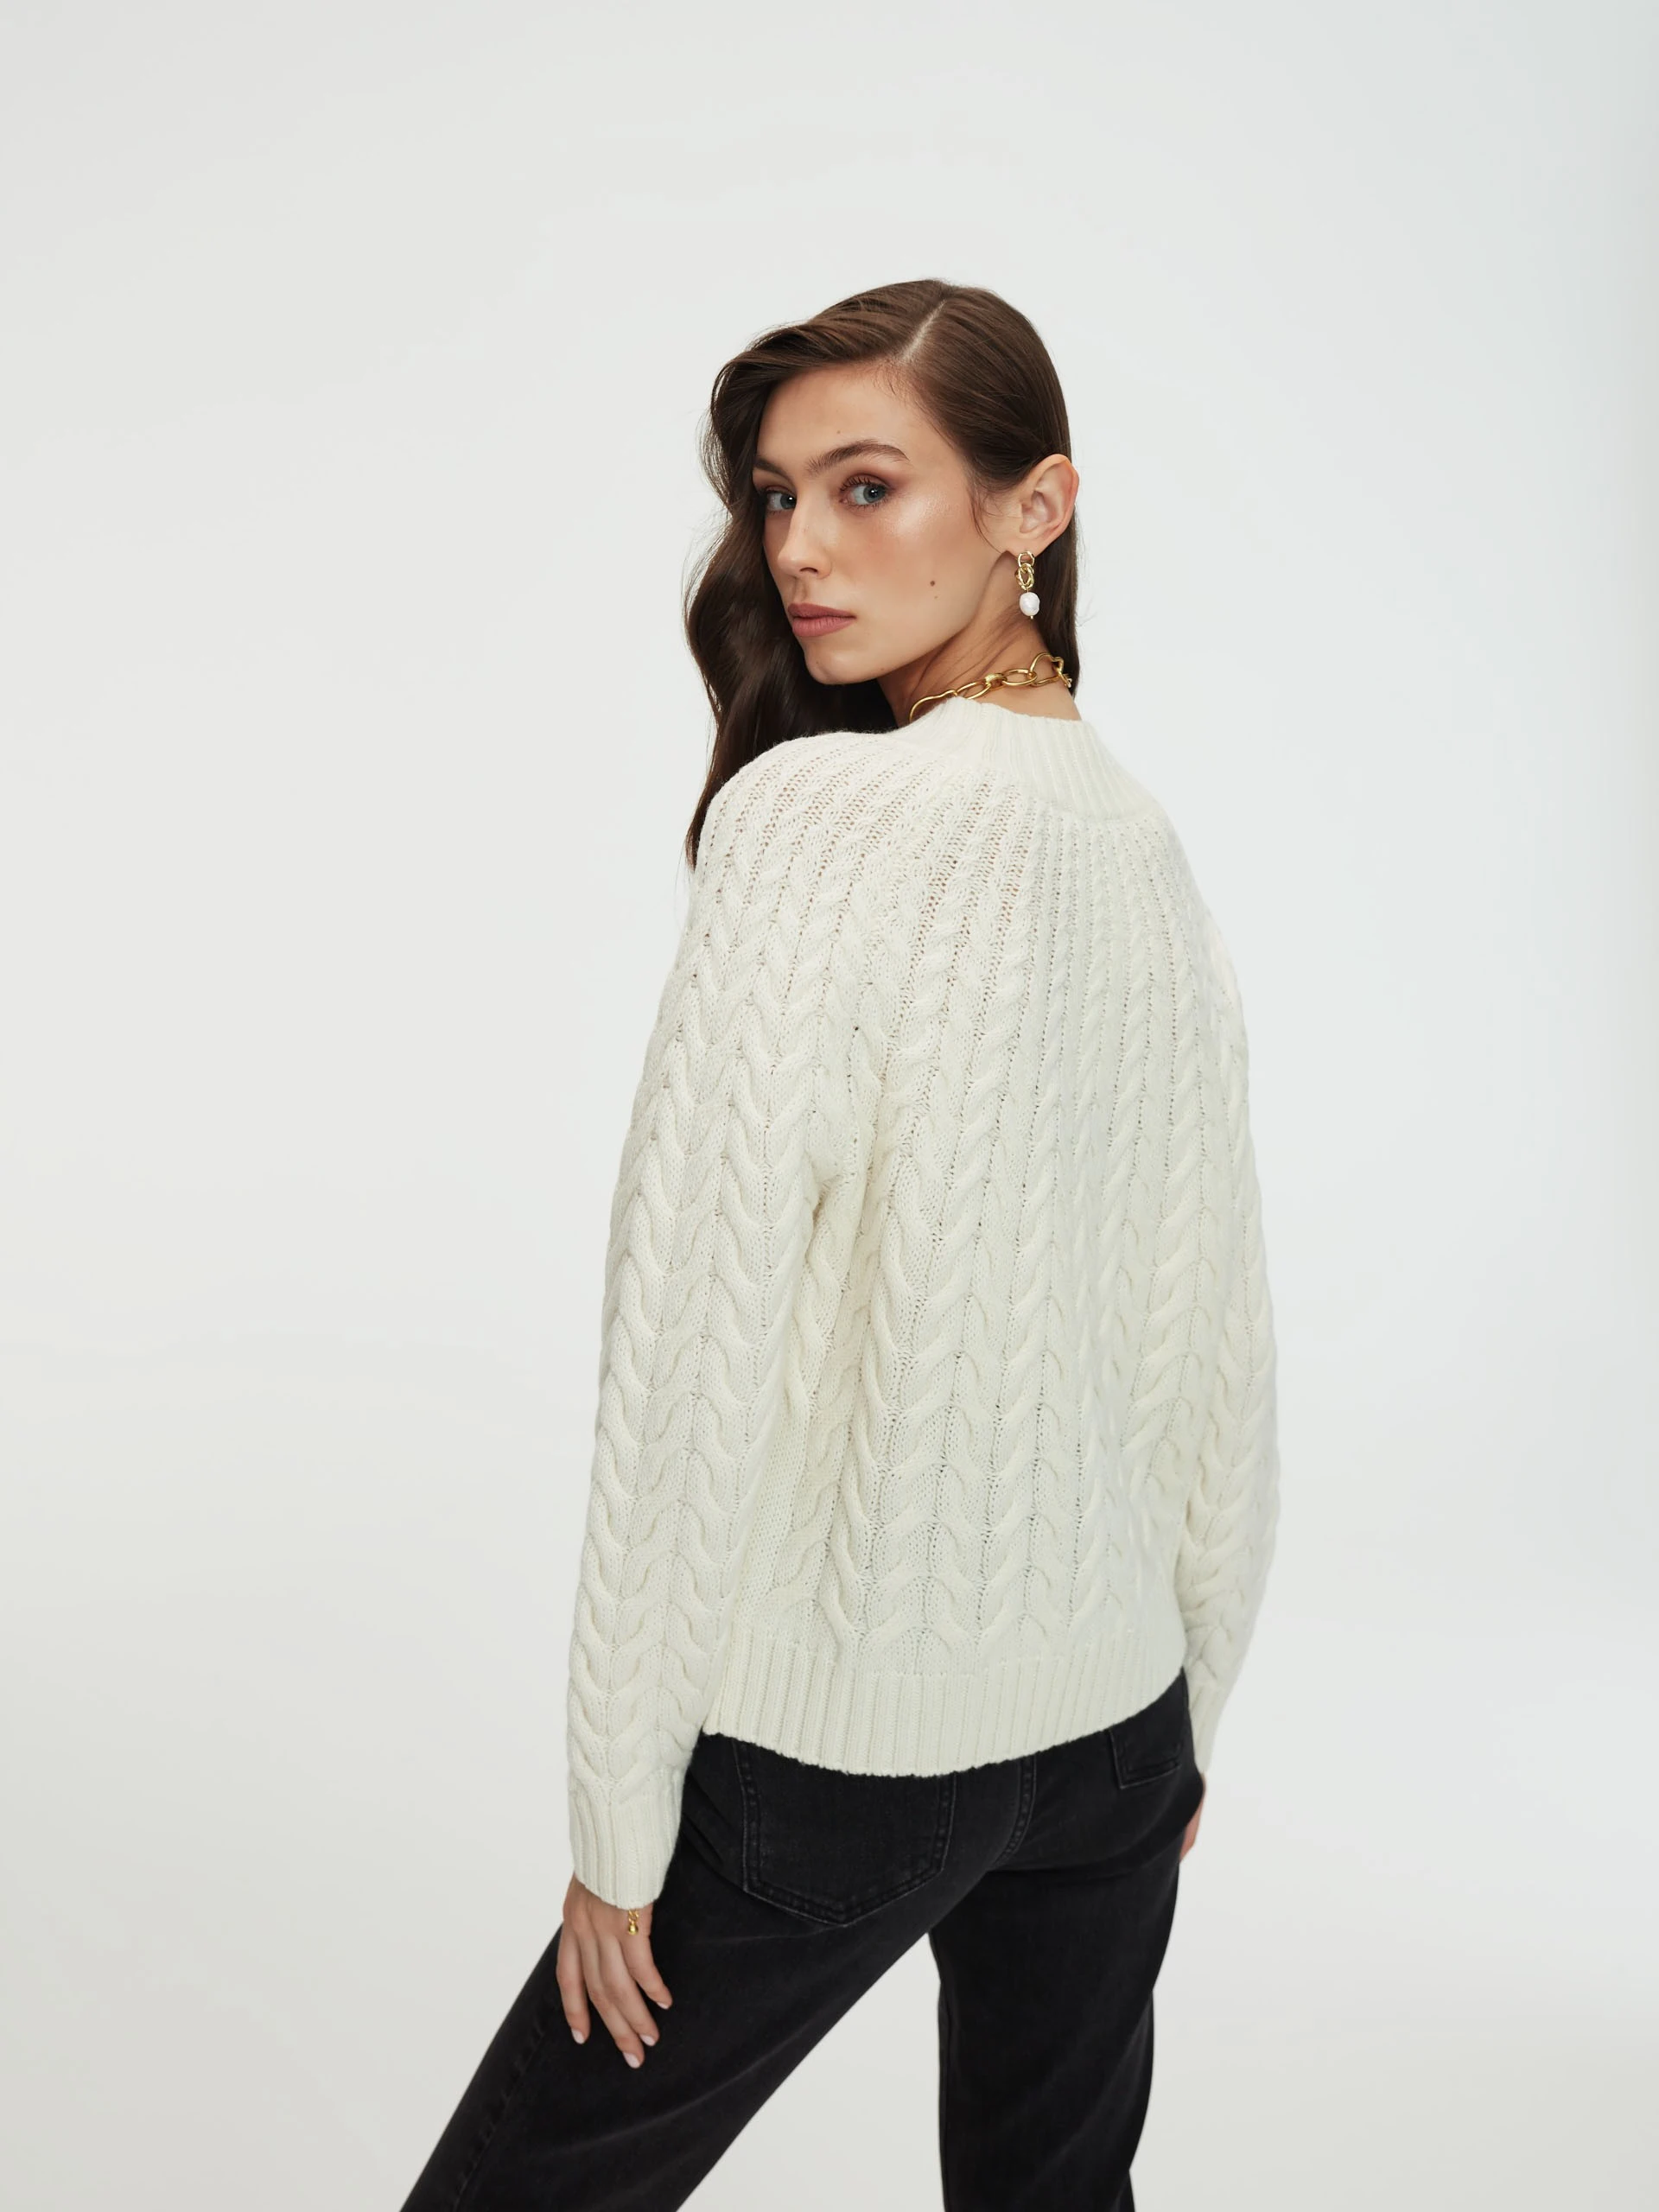 Woven sweater